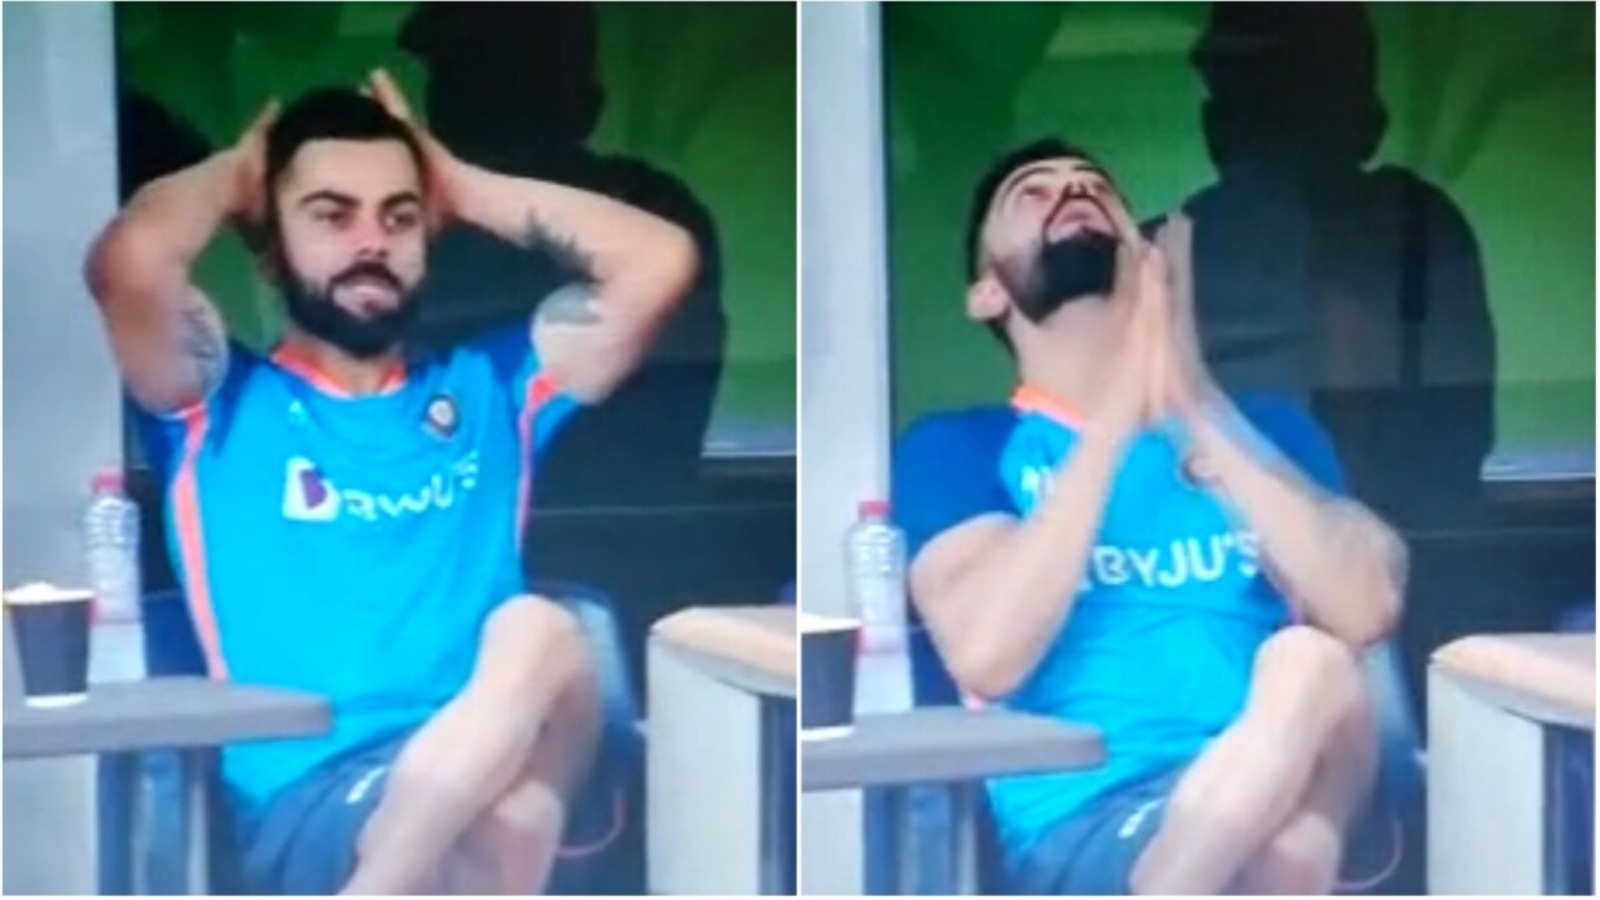 watch-kohli-looks-up-mouths-bach-gaye-in-million-dollar-reaction-to-jadeja-s-lbw-survival-in-india-vs-pakistan-game